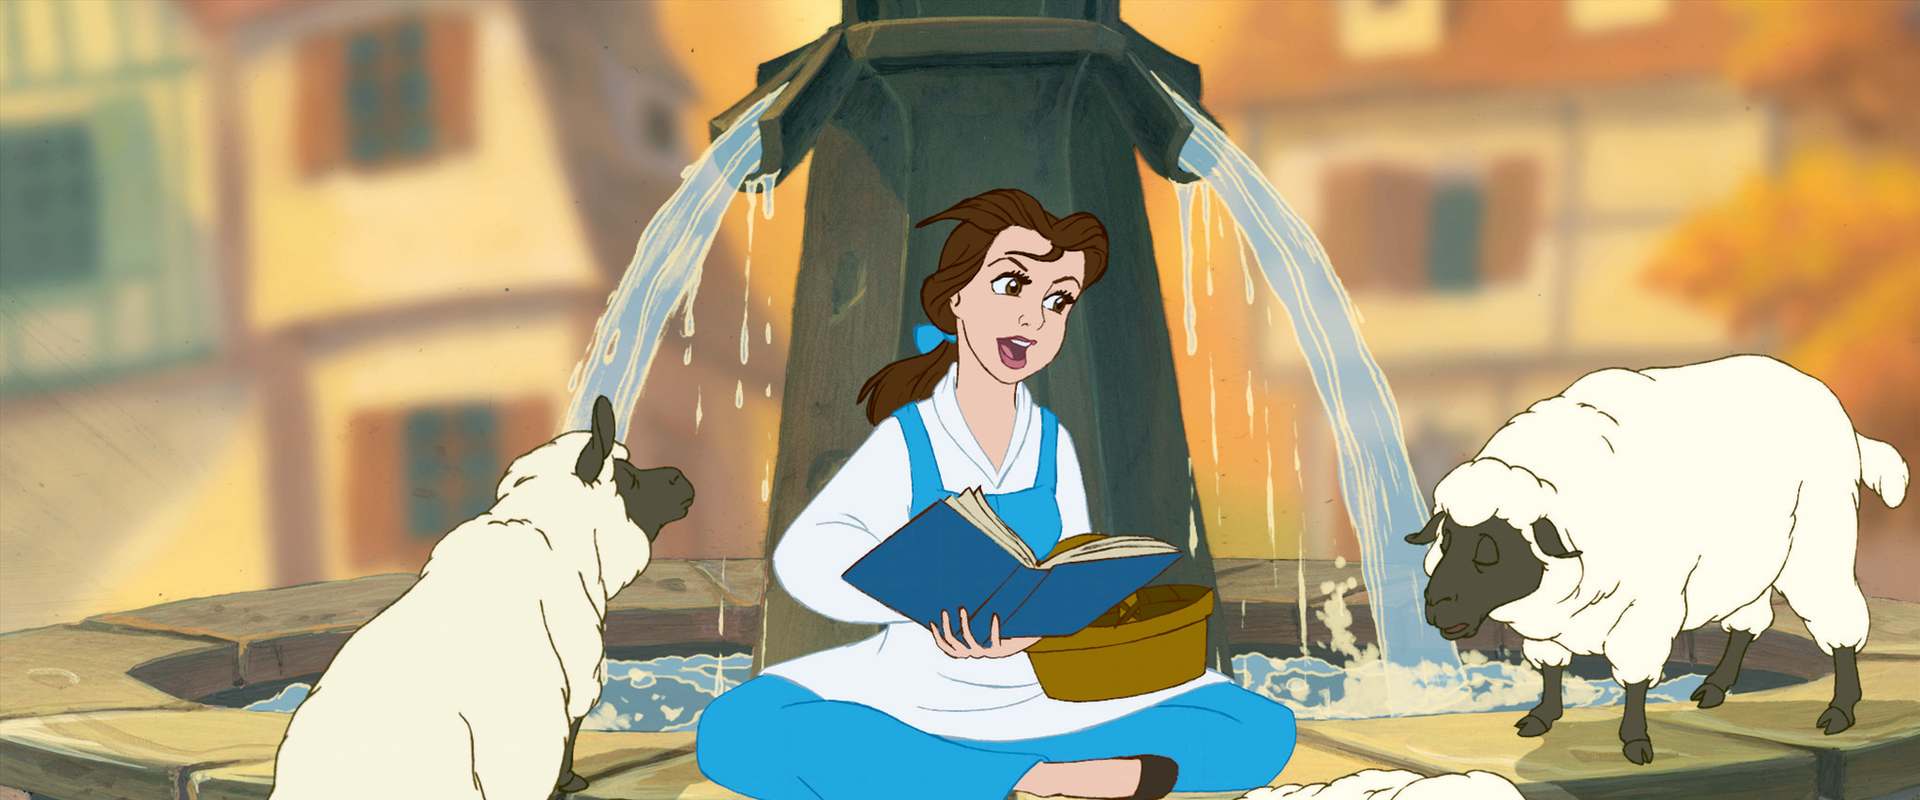 Watch Beauty and the Beast on Netflix Today! 